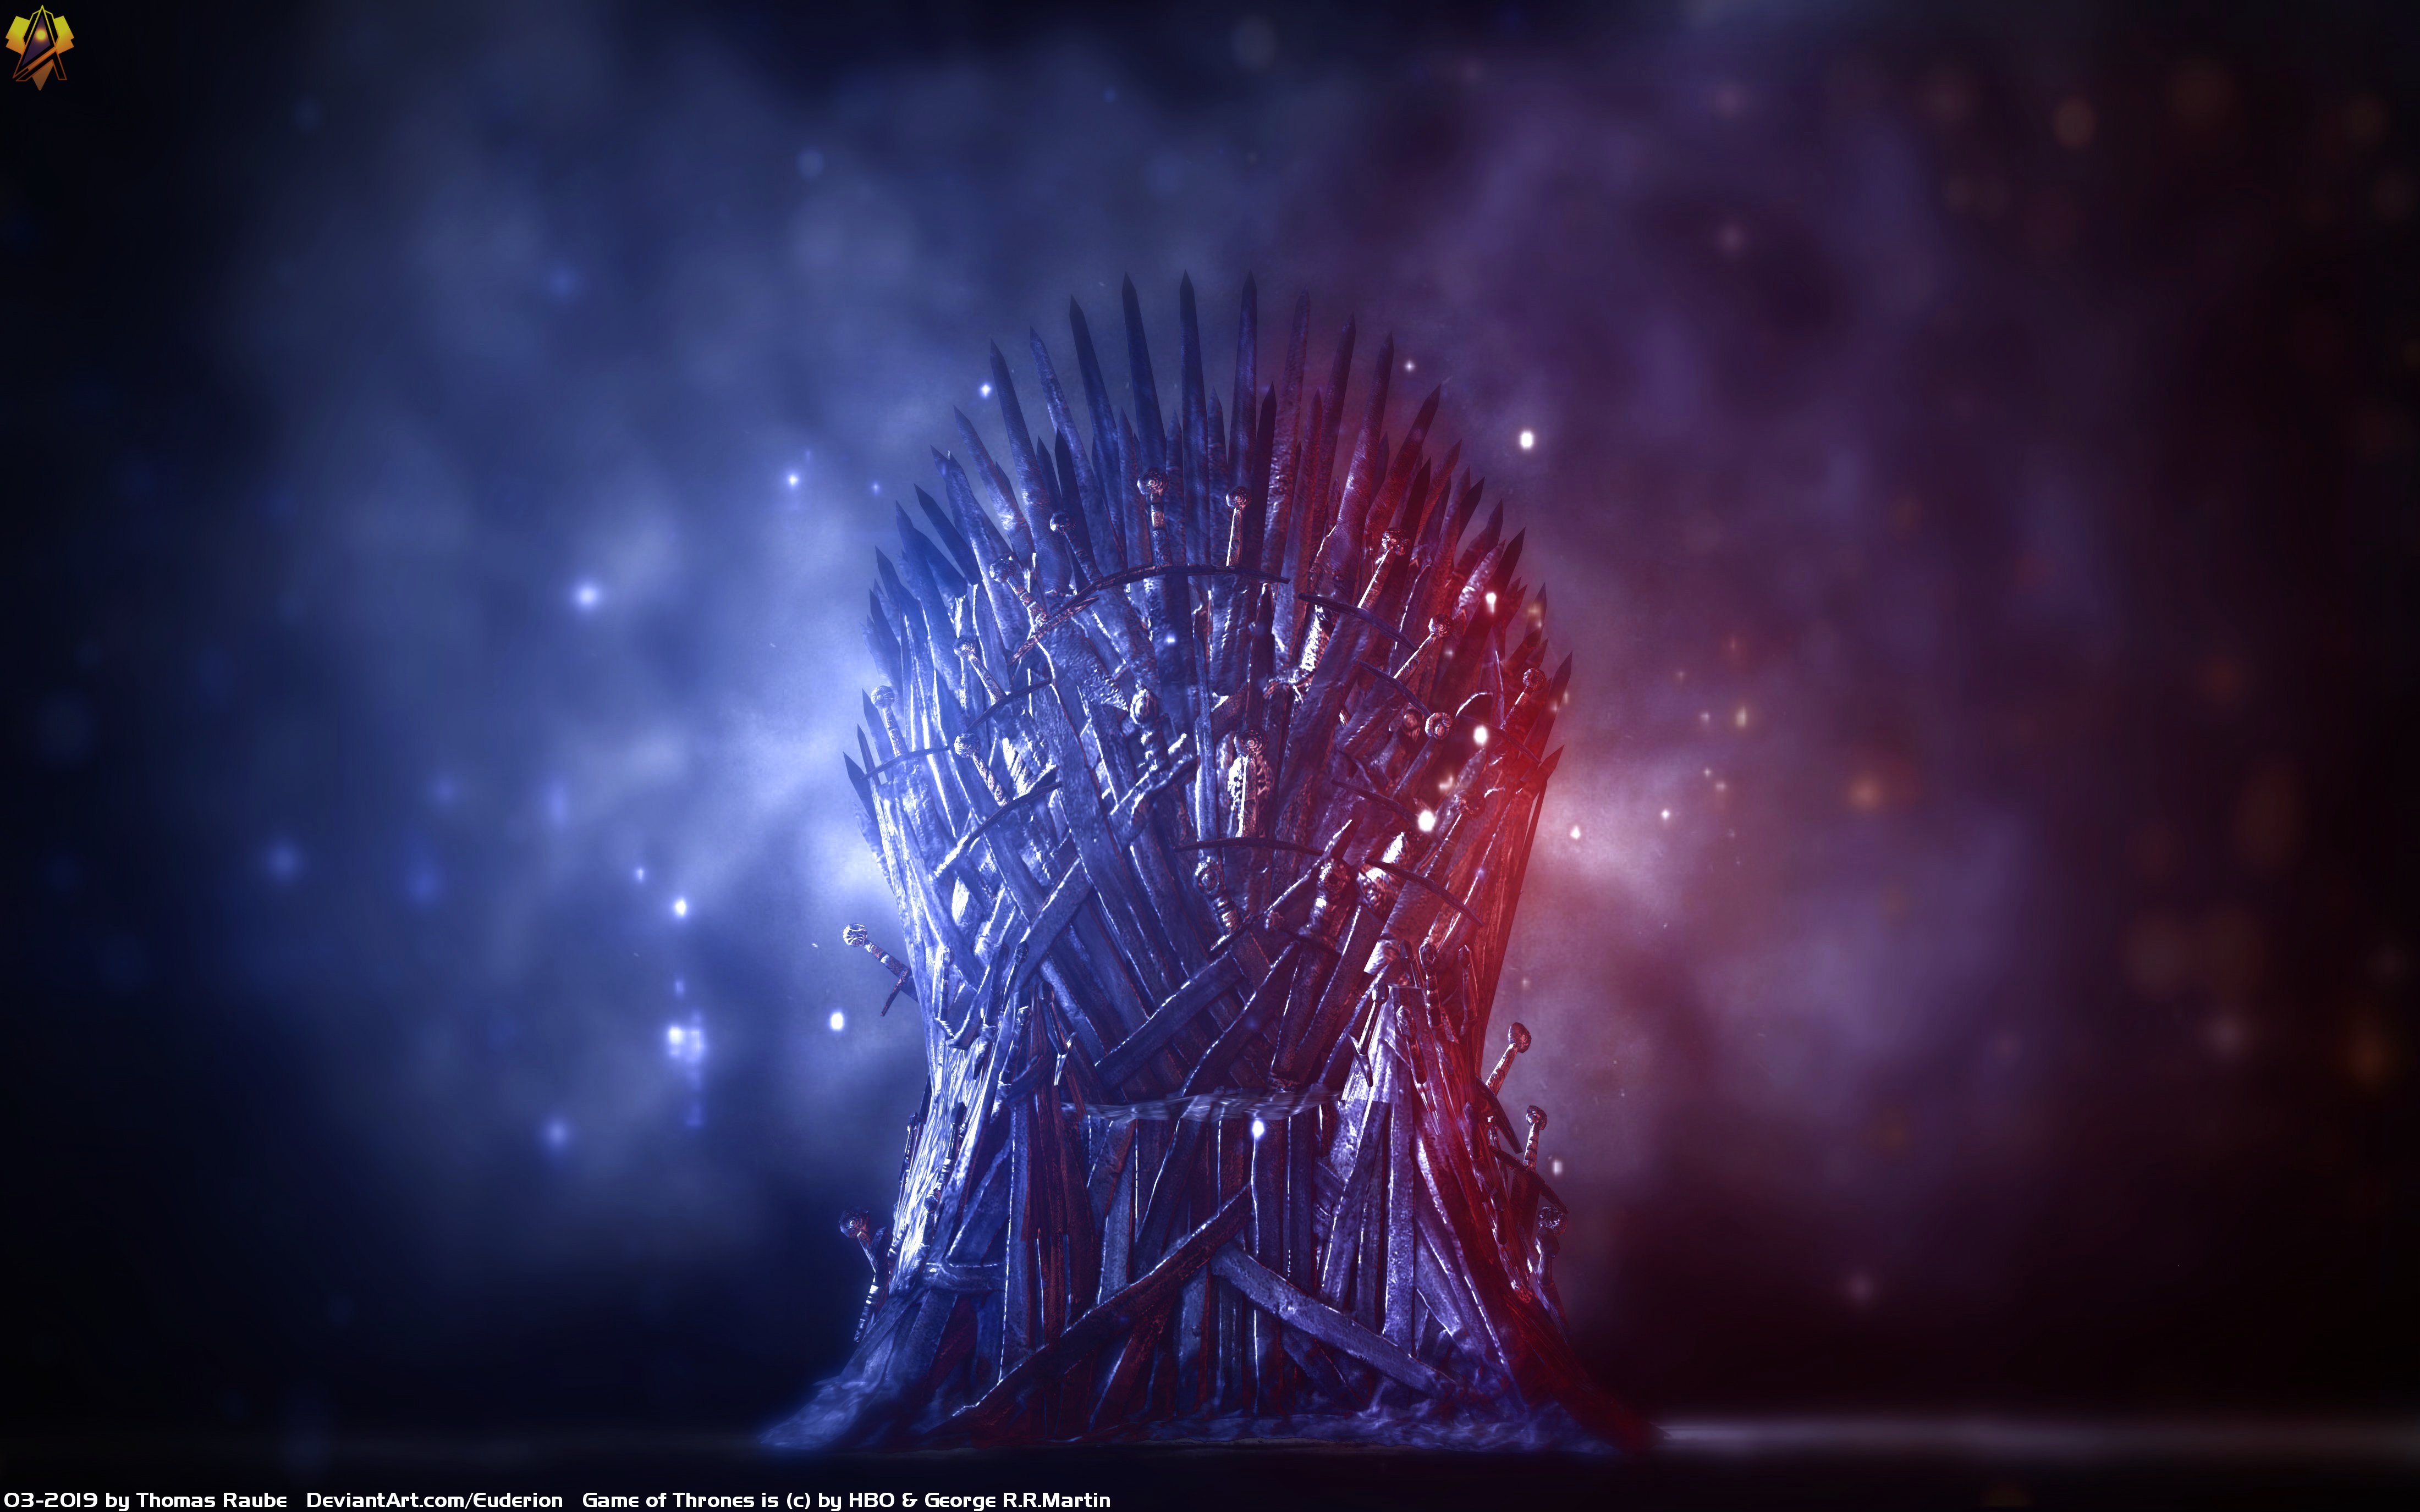 throne, tv show, game of thrones, a song of ice and fire, iron throne